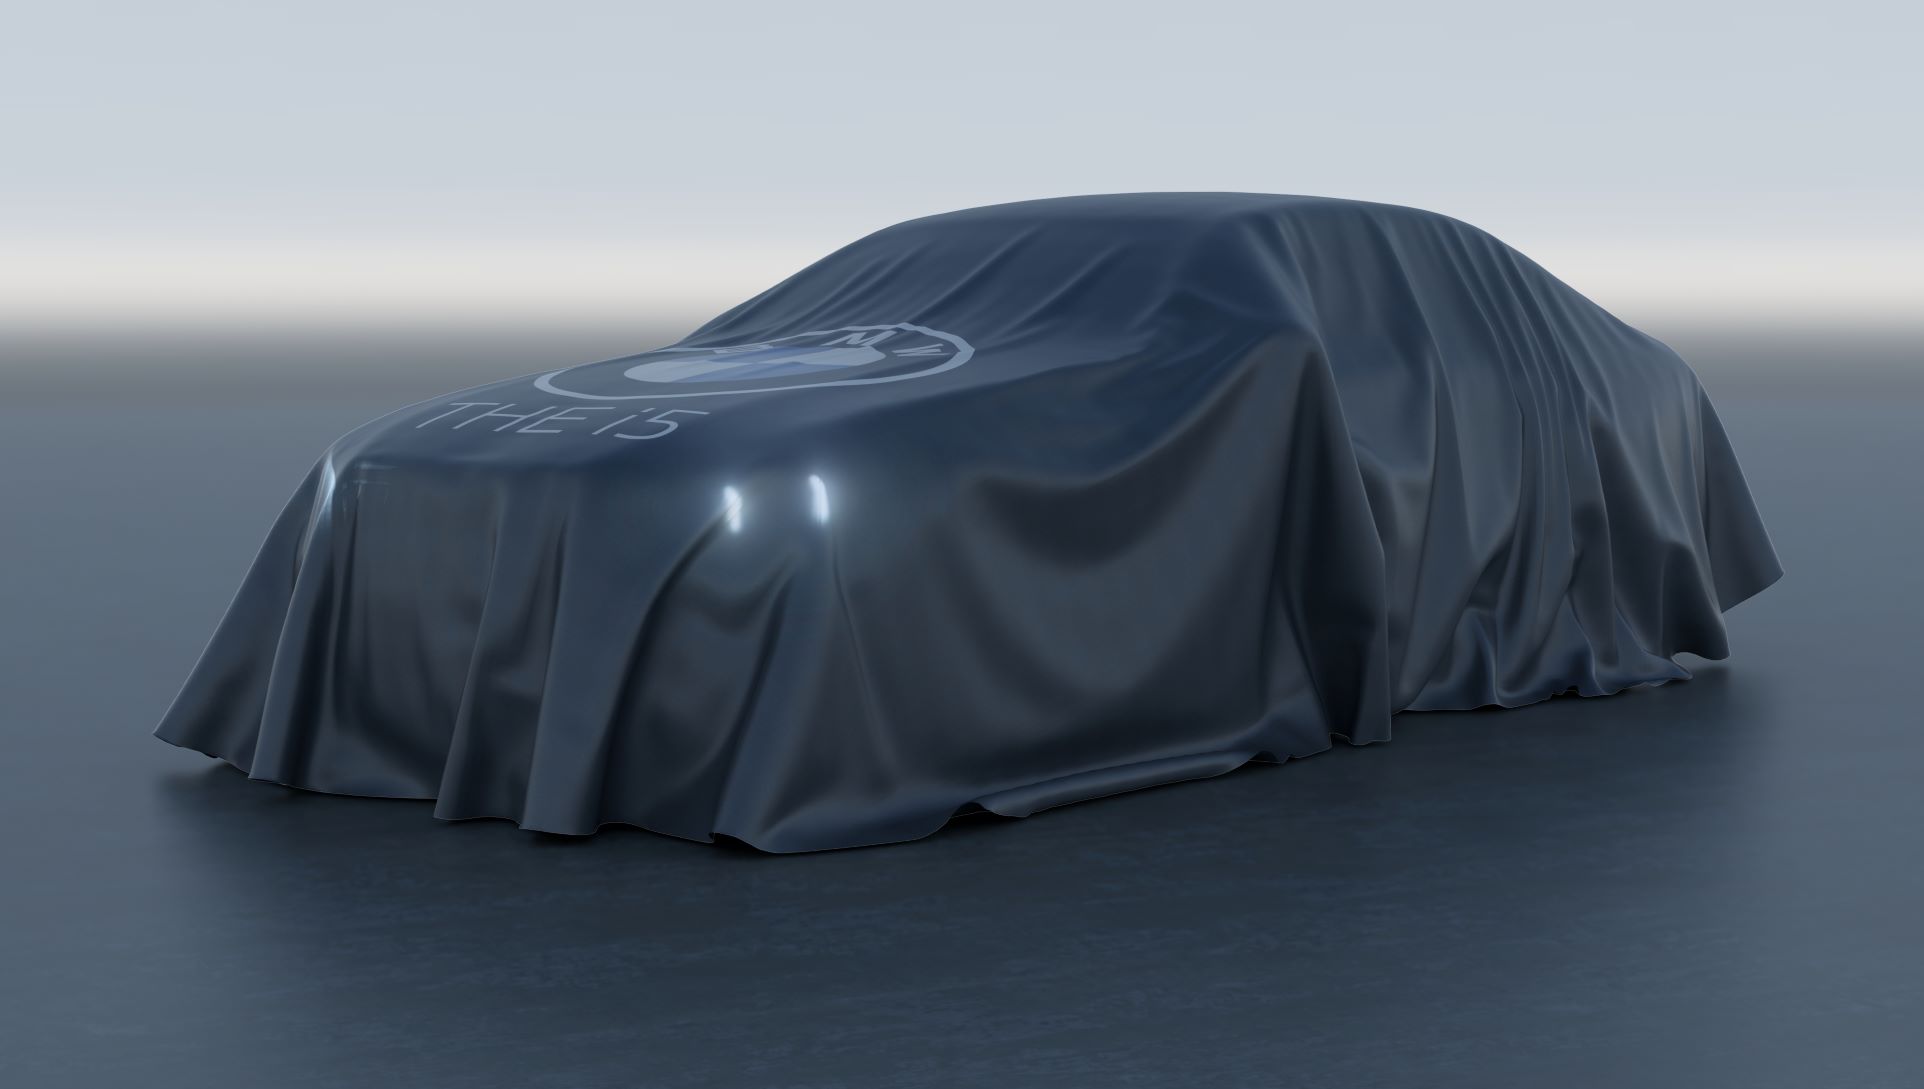 A teaser of the upcoming BMW i5 under covers